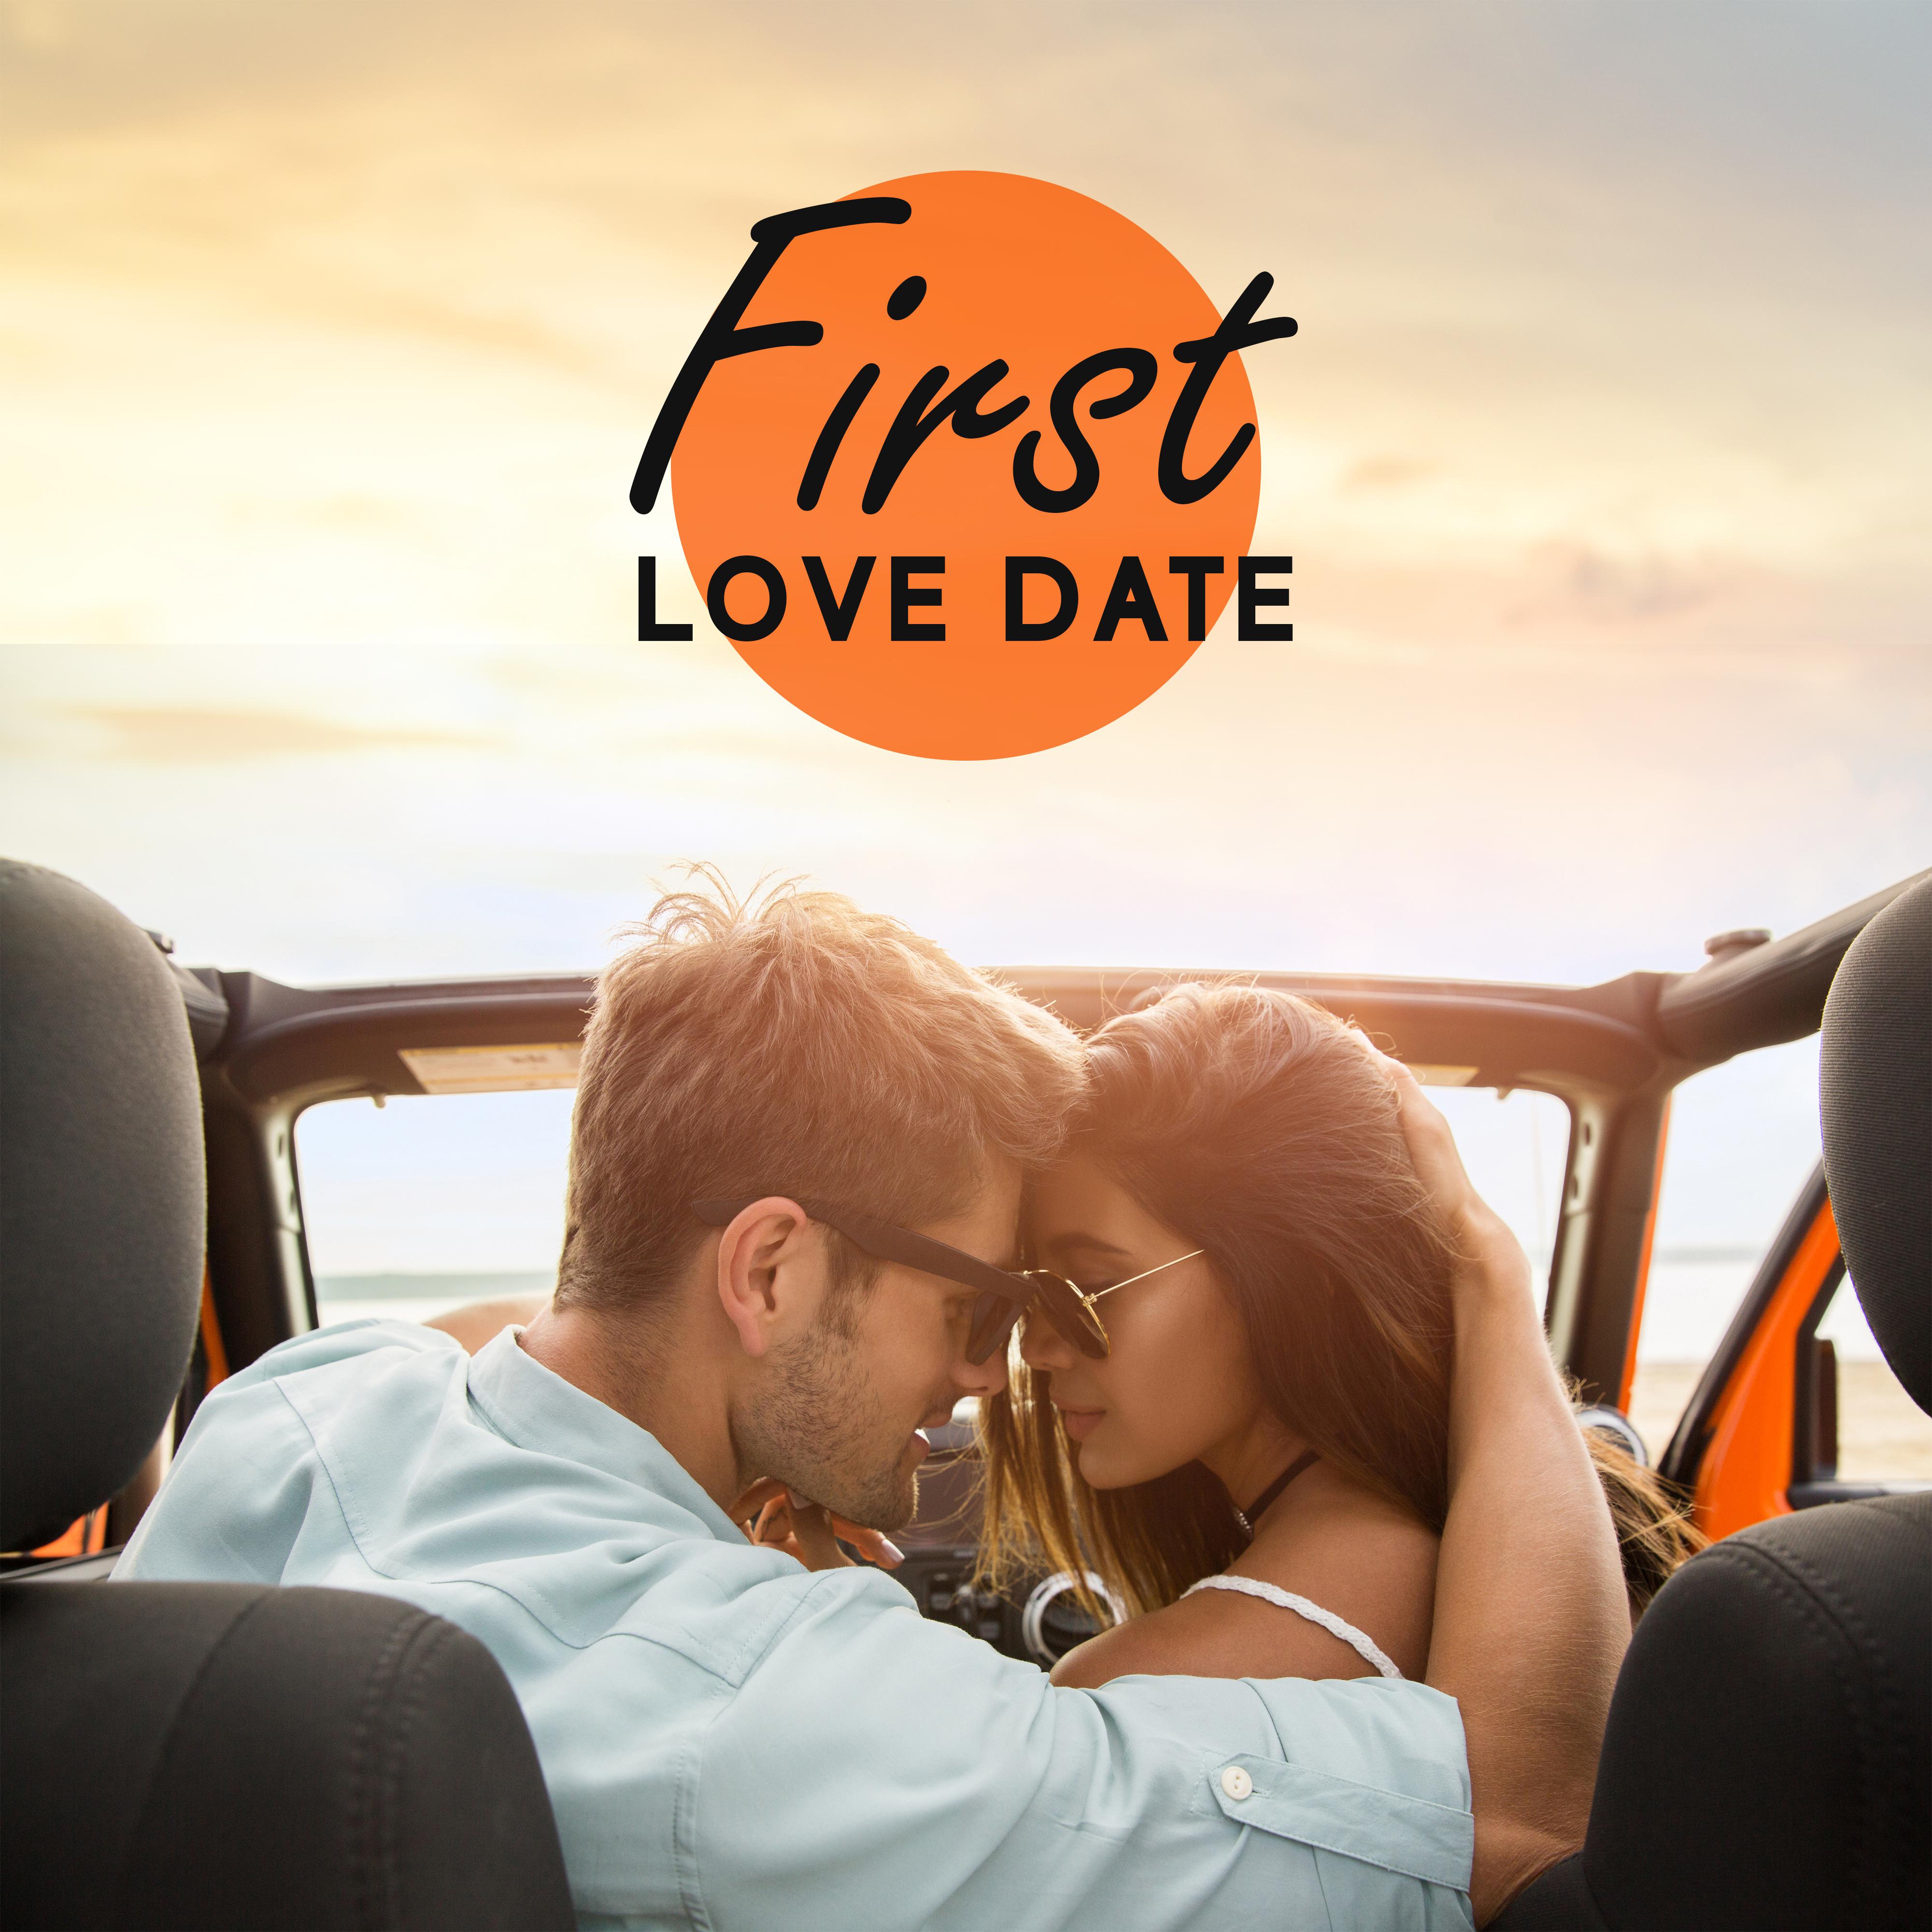 First Love Date: Perfect Restaurant Background Smooth Jazz Music 2019 for Romantic Dinner with Love